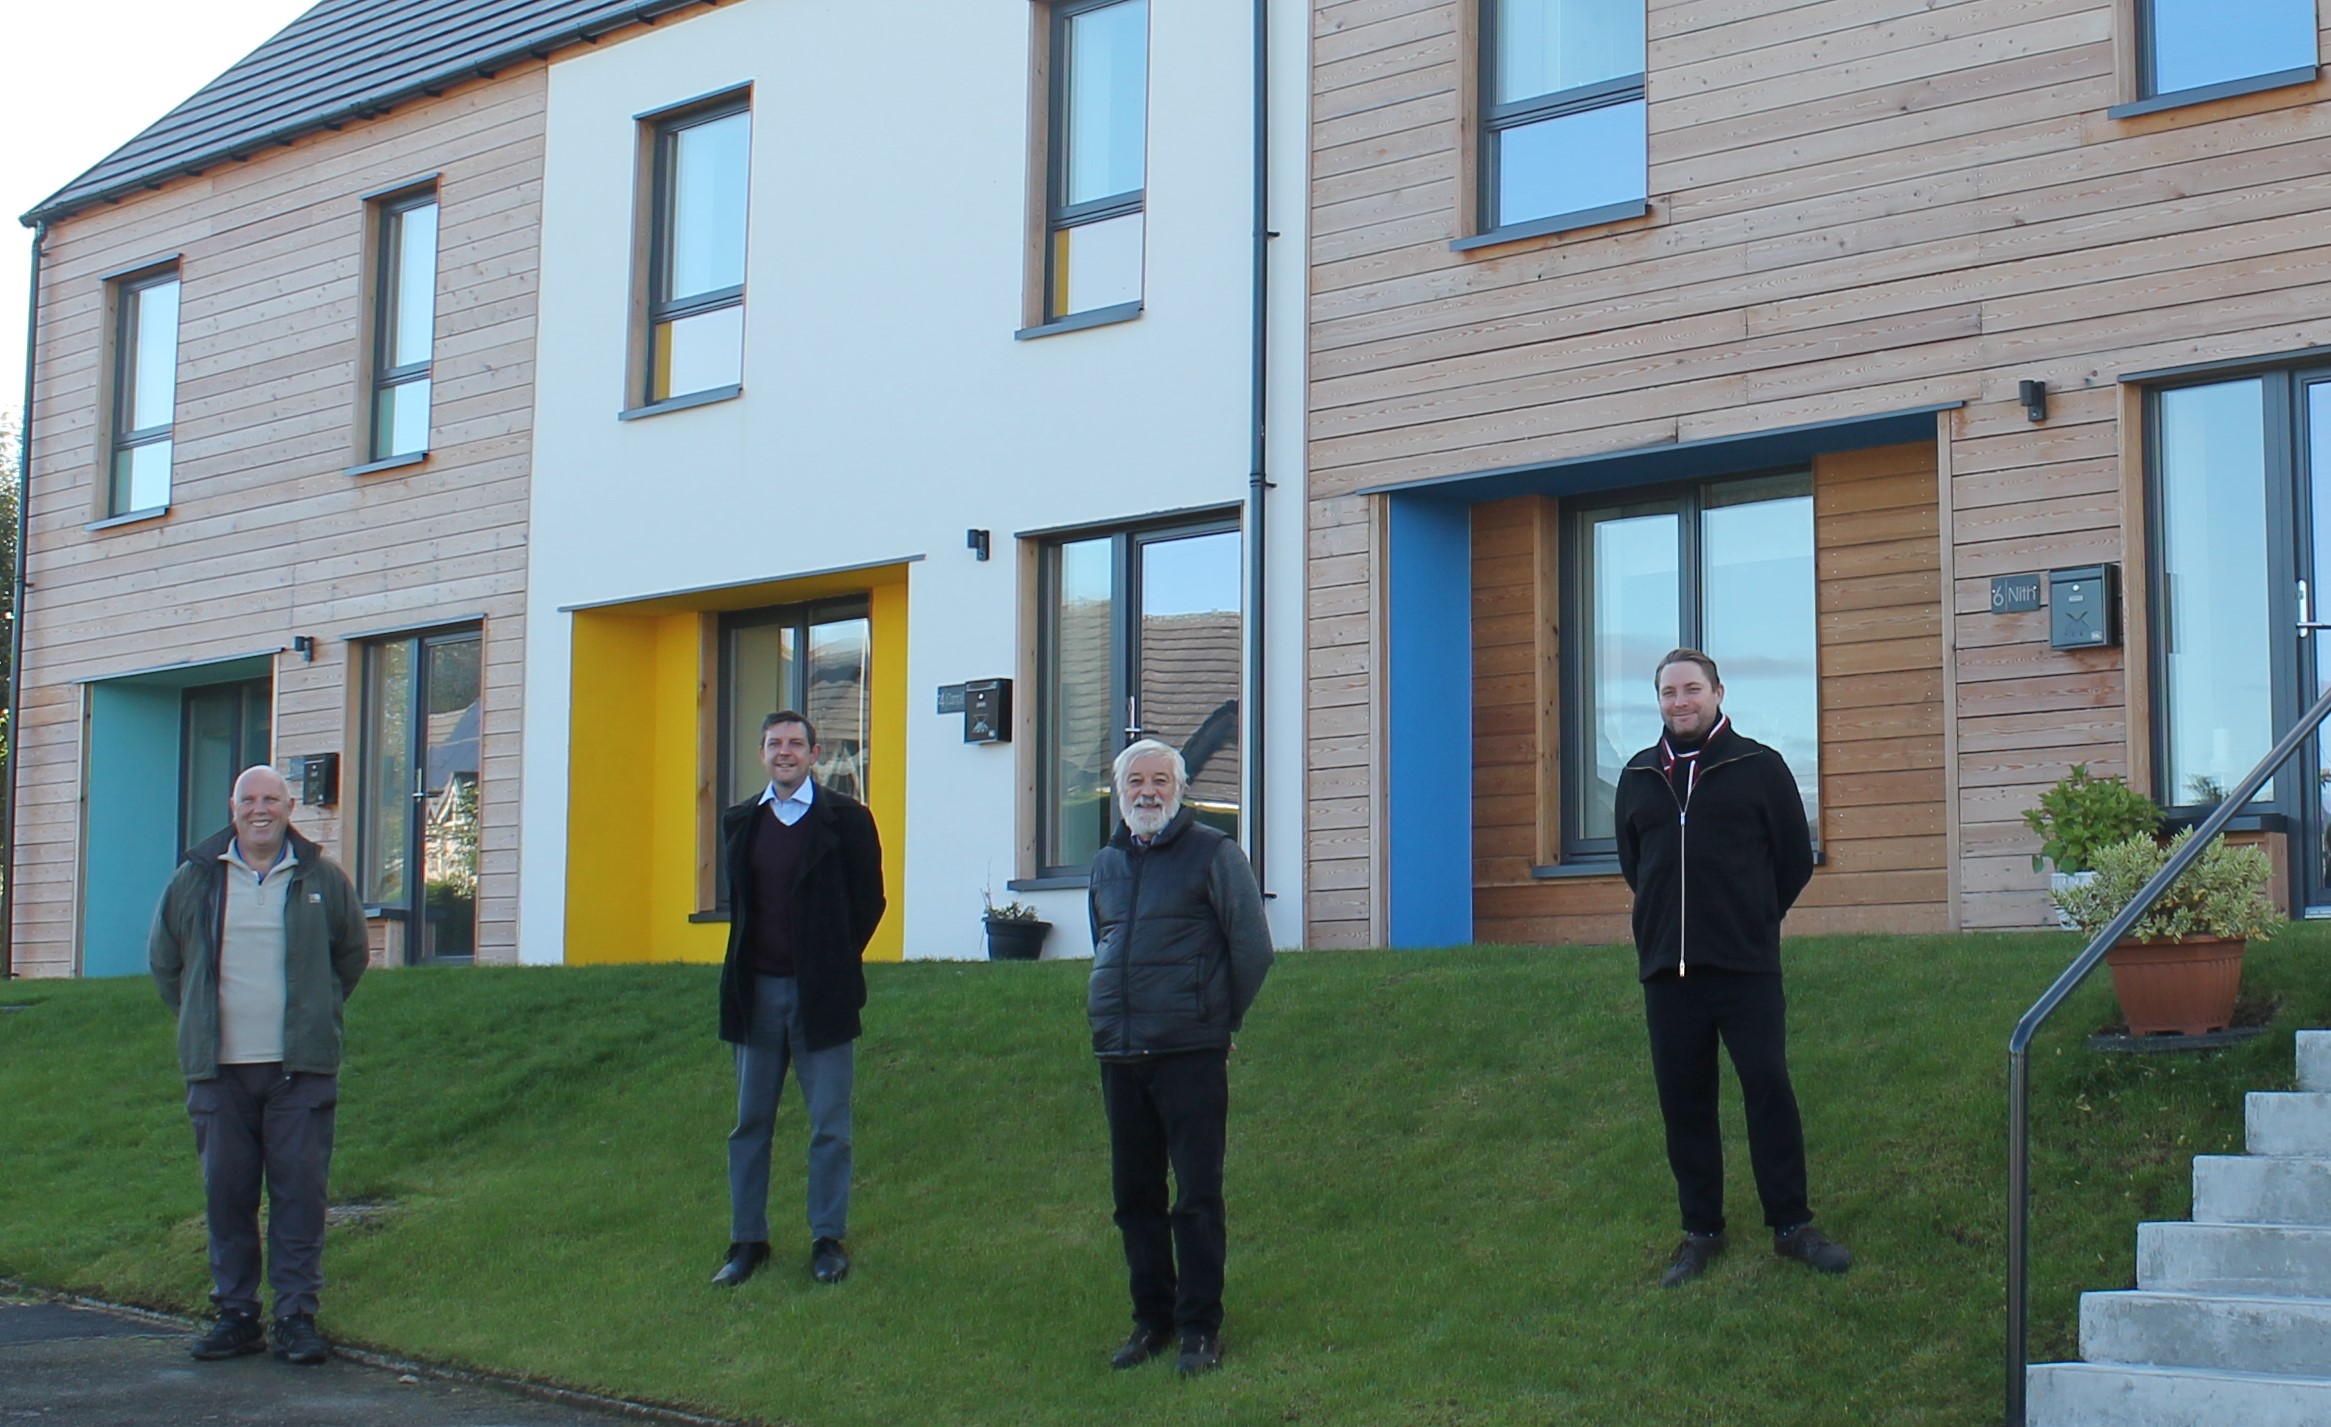 Tenants move into Scotland's first community-owned Passivhaus development